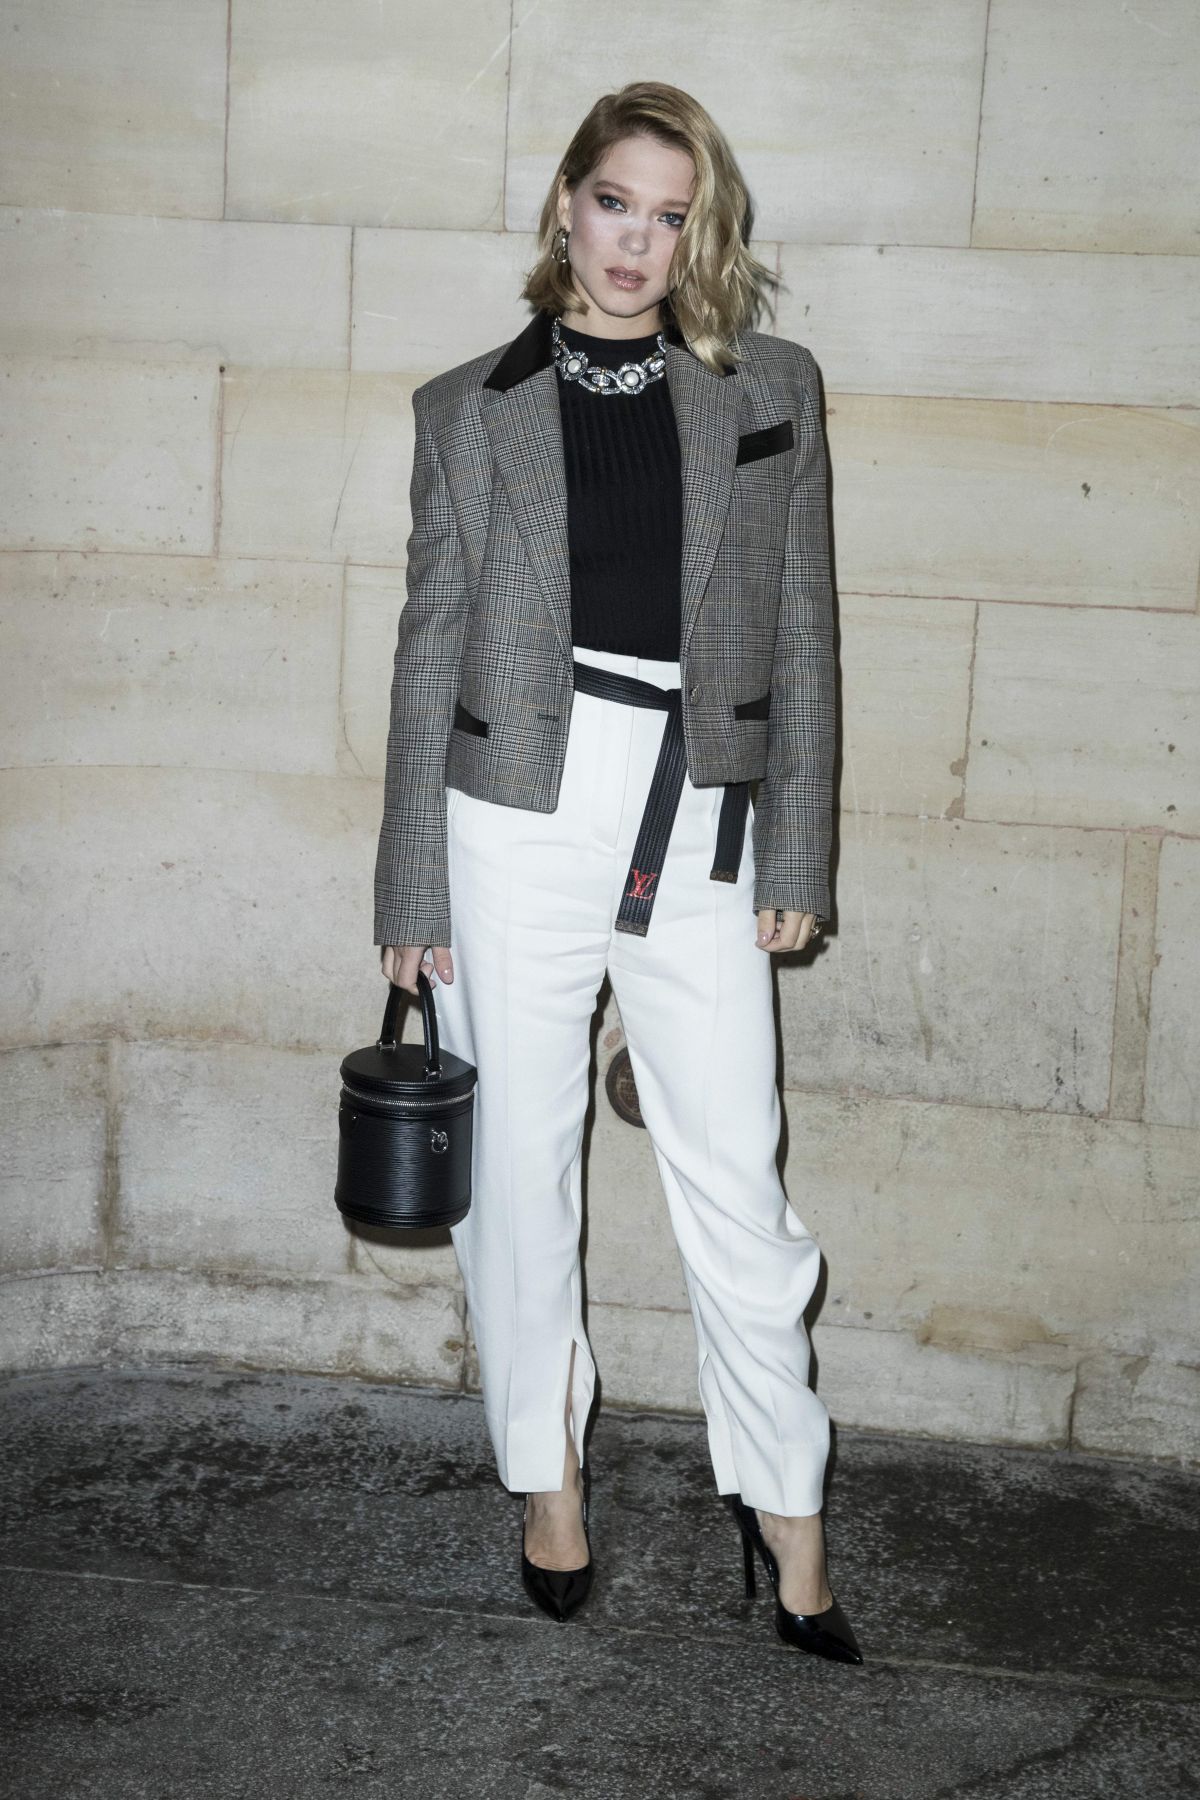 It's 'Game On' for Léa Seydoux in Louis Vuitton's Cruise 2021